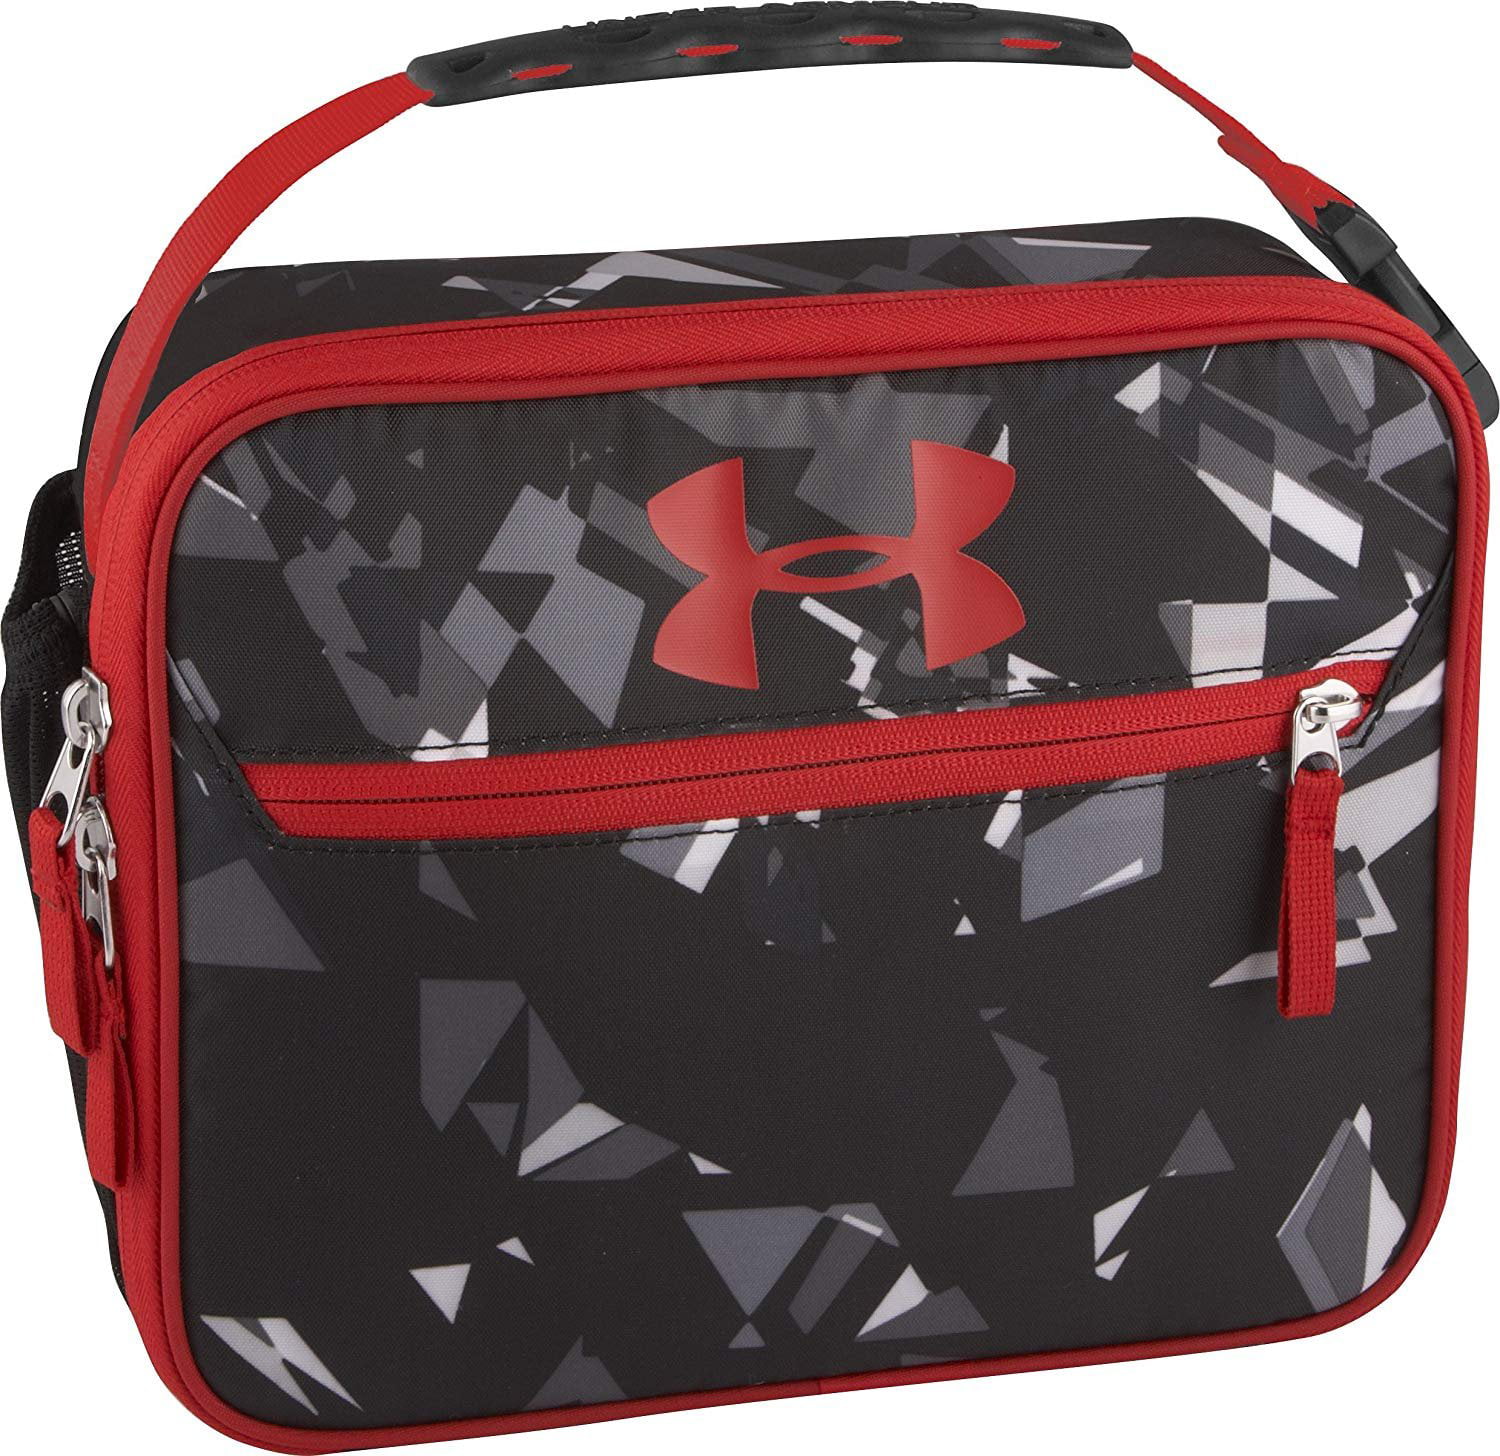 Under Armour School Insulated Lunch Tote Bag Box Cooler Black Pink Dots 